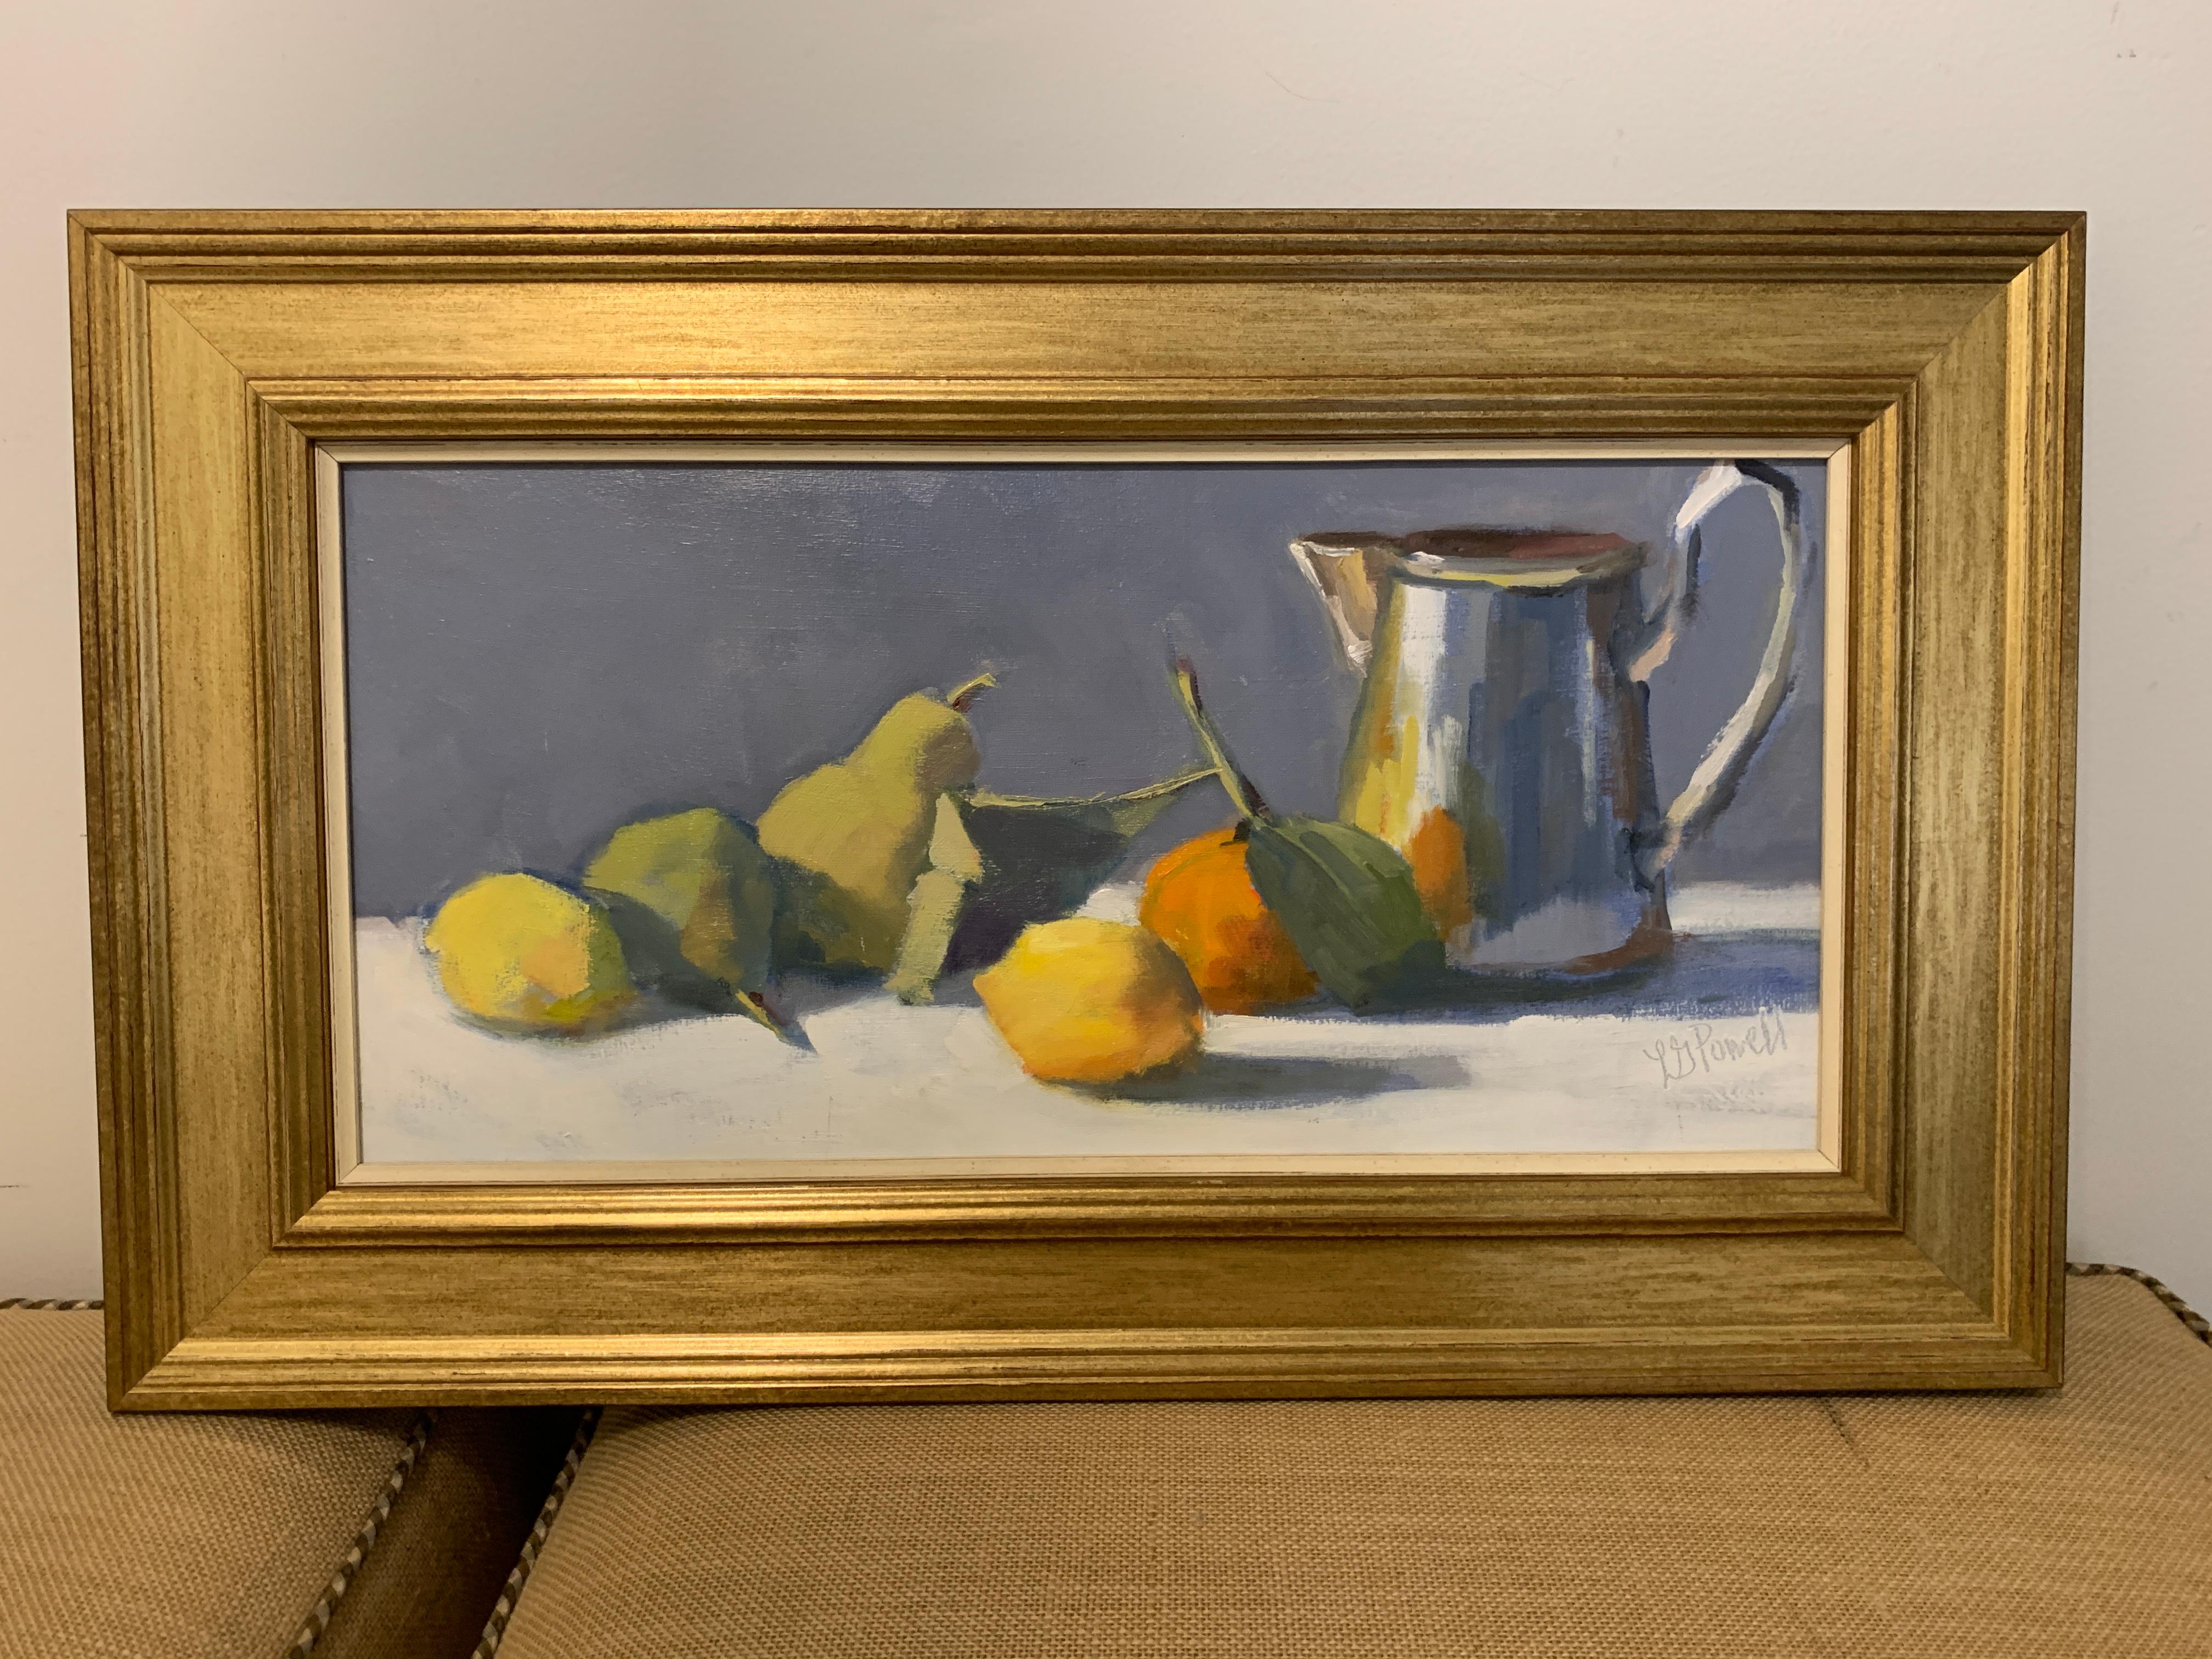 'Tankard and Fruit' is a small framed Post-Impressionist oil on panel still-life painting of horizontal format created by American artist Lesley Powell in 2019. Featuring a palette made of green, orange, yellow, silver and grey tones, the painting